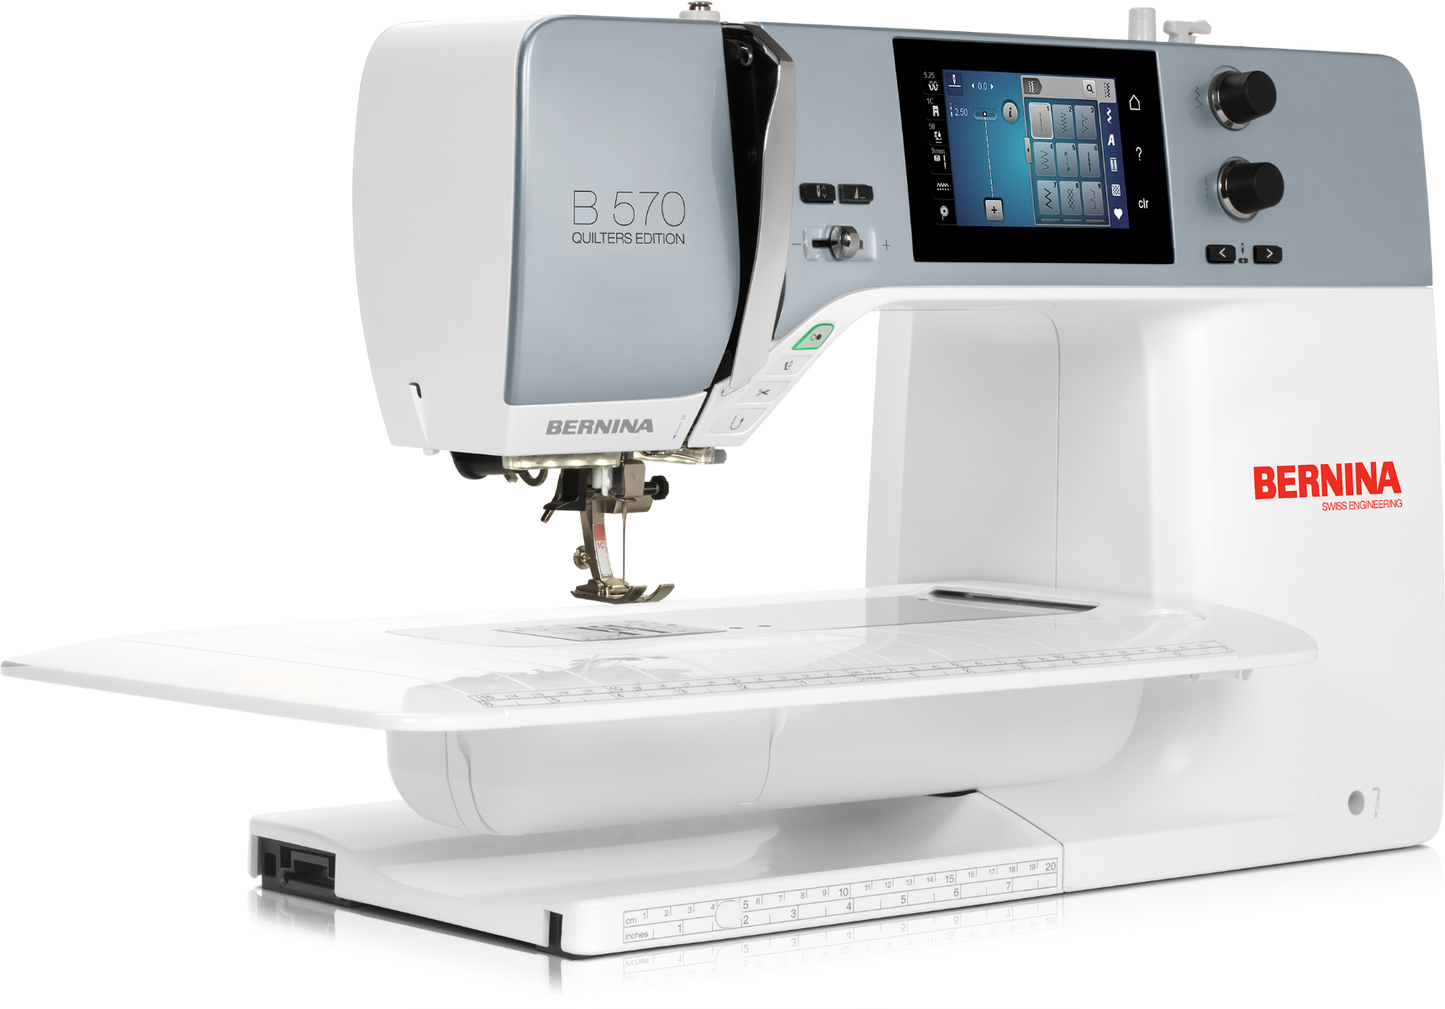 Bernina B570QE Sewing and Quilting Machine with Table,Bernina B570QE Sewing and Quilting Machine with Table,Bernina B570QE Sewing and Quilting Machine,Bernina B570QE Sewing and Quilting Machine,Bernina B570QE Sewing and Quilting Machine,Bernina B570QE Sewing and Quilting Machine